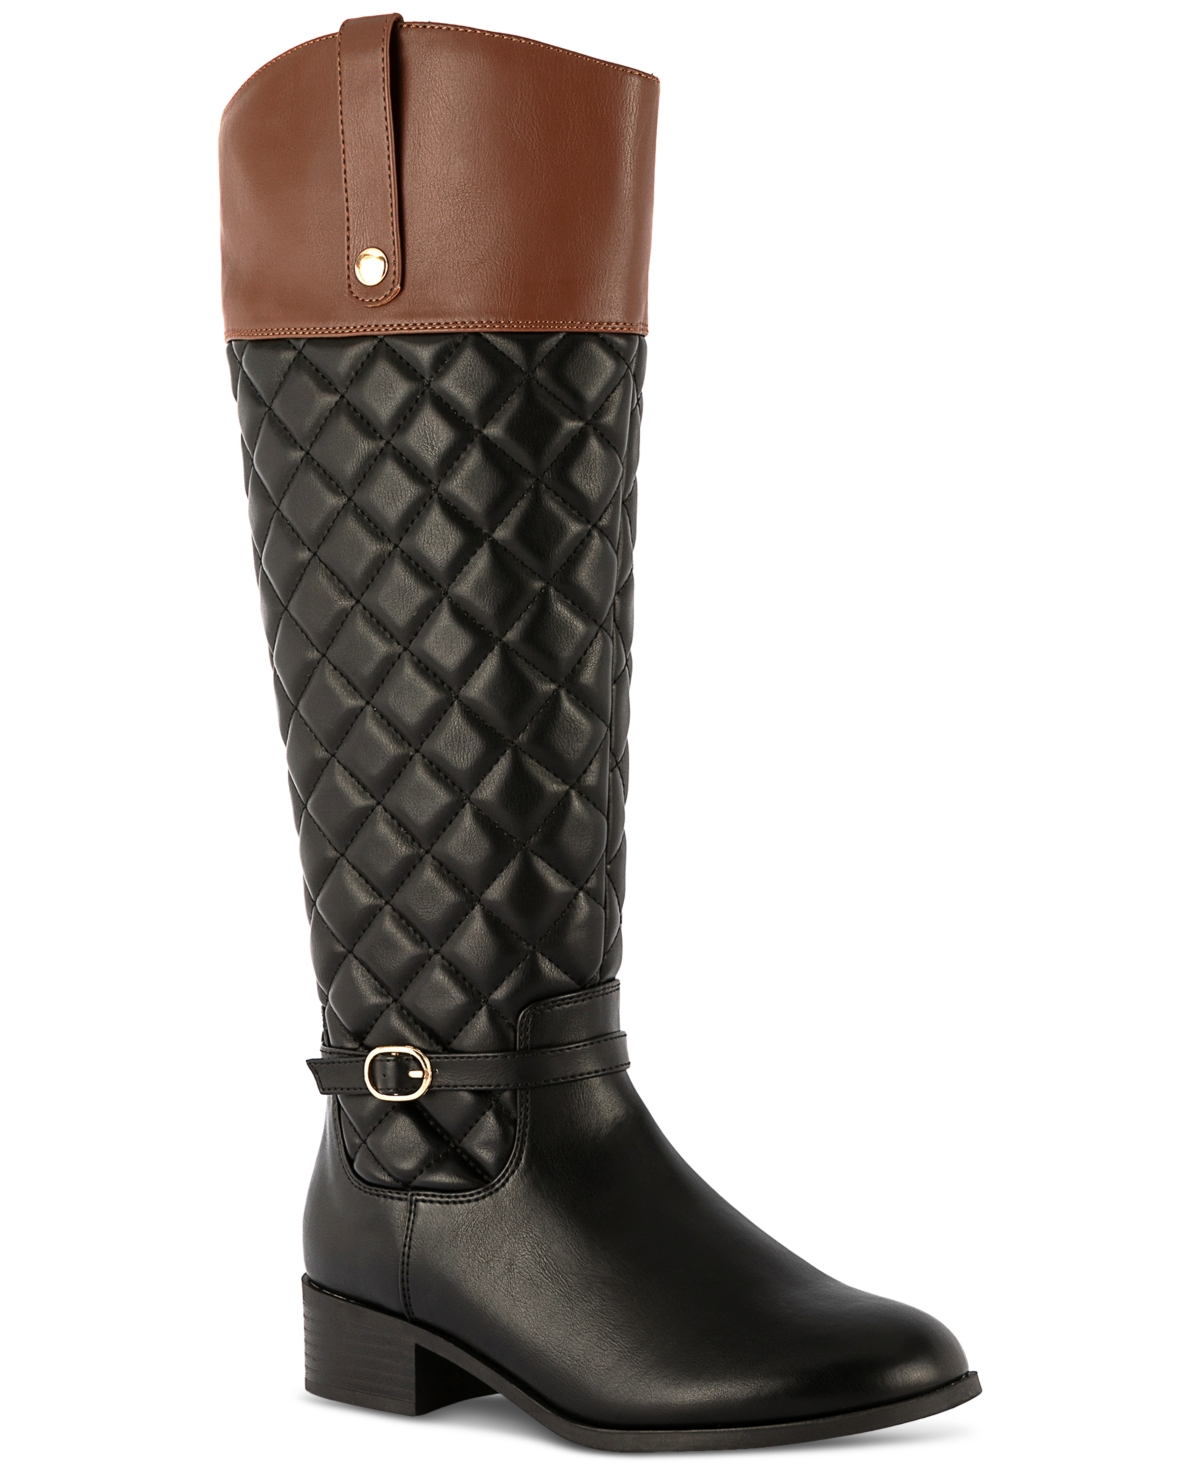 Stancee Quilted Buckled Riding Boots, Created for Macys - Chocolate Micro Smooth